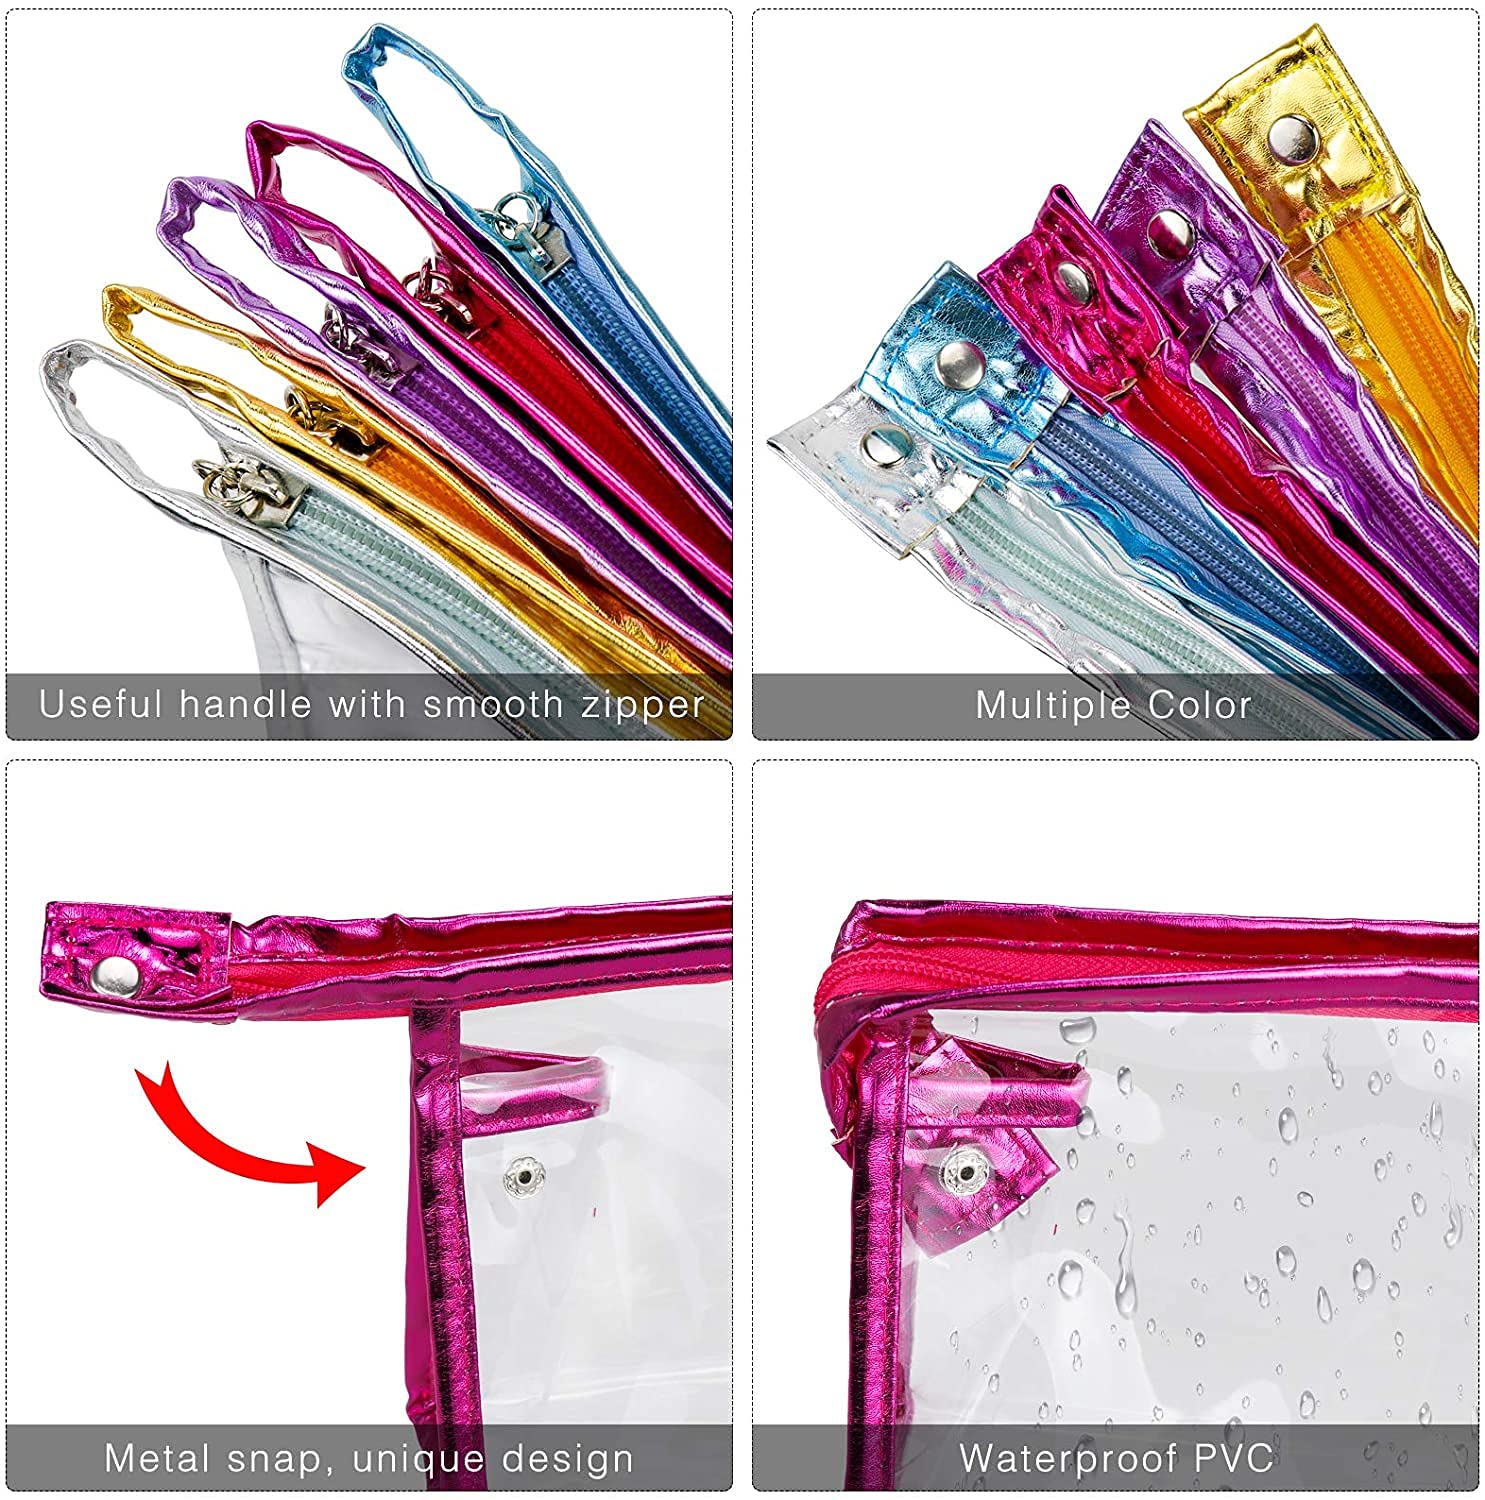 Meetory 5 Pcs Clear Waterproof Cosmetic Bag with Zipper, PVC Transparent Plastic Makeup Organizing Bags Travel Toiletry Pouch for Bathroom, Vacation and Organizing